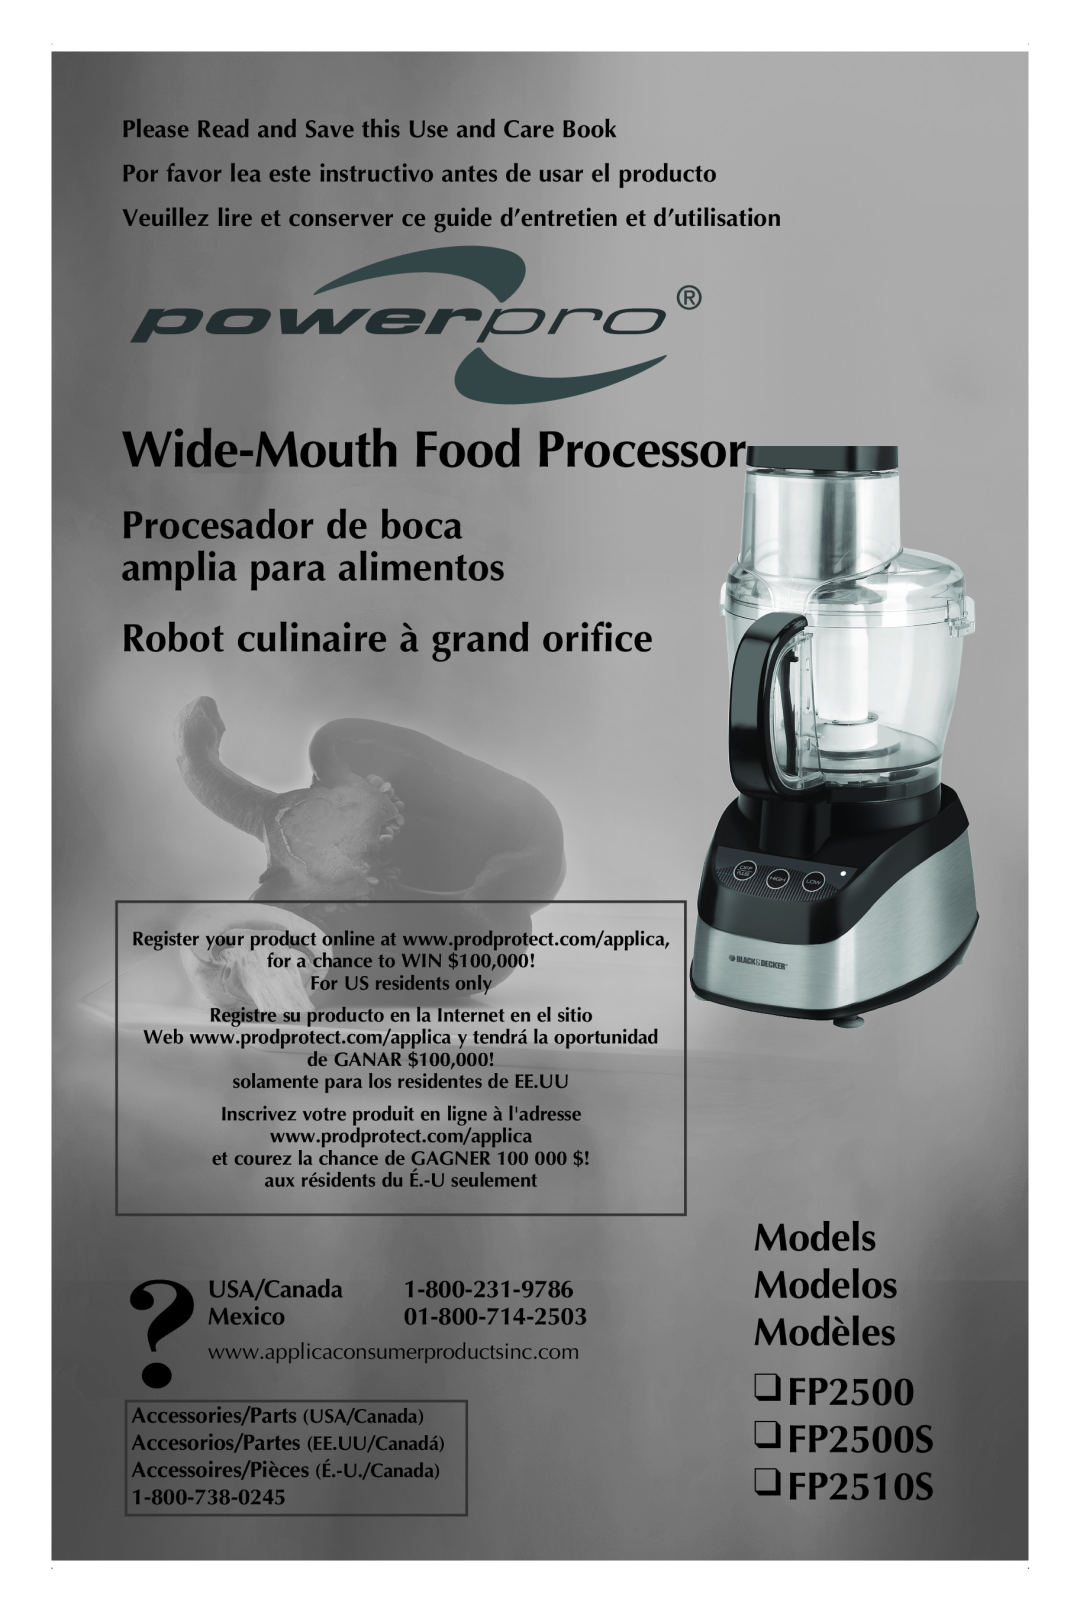 Black & Decker FP2510S manual Please Read and Save this Use and Care Book, USA/Canada Mexico, Wide-MouthFood Processor 